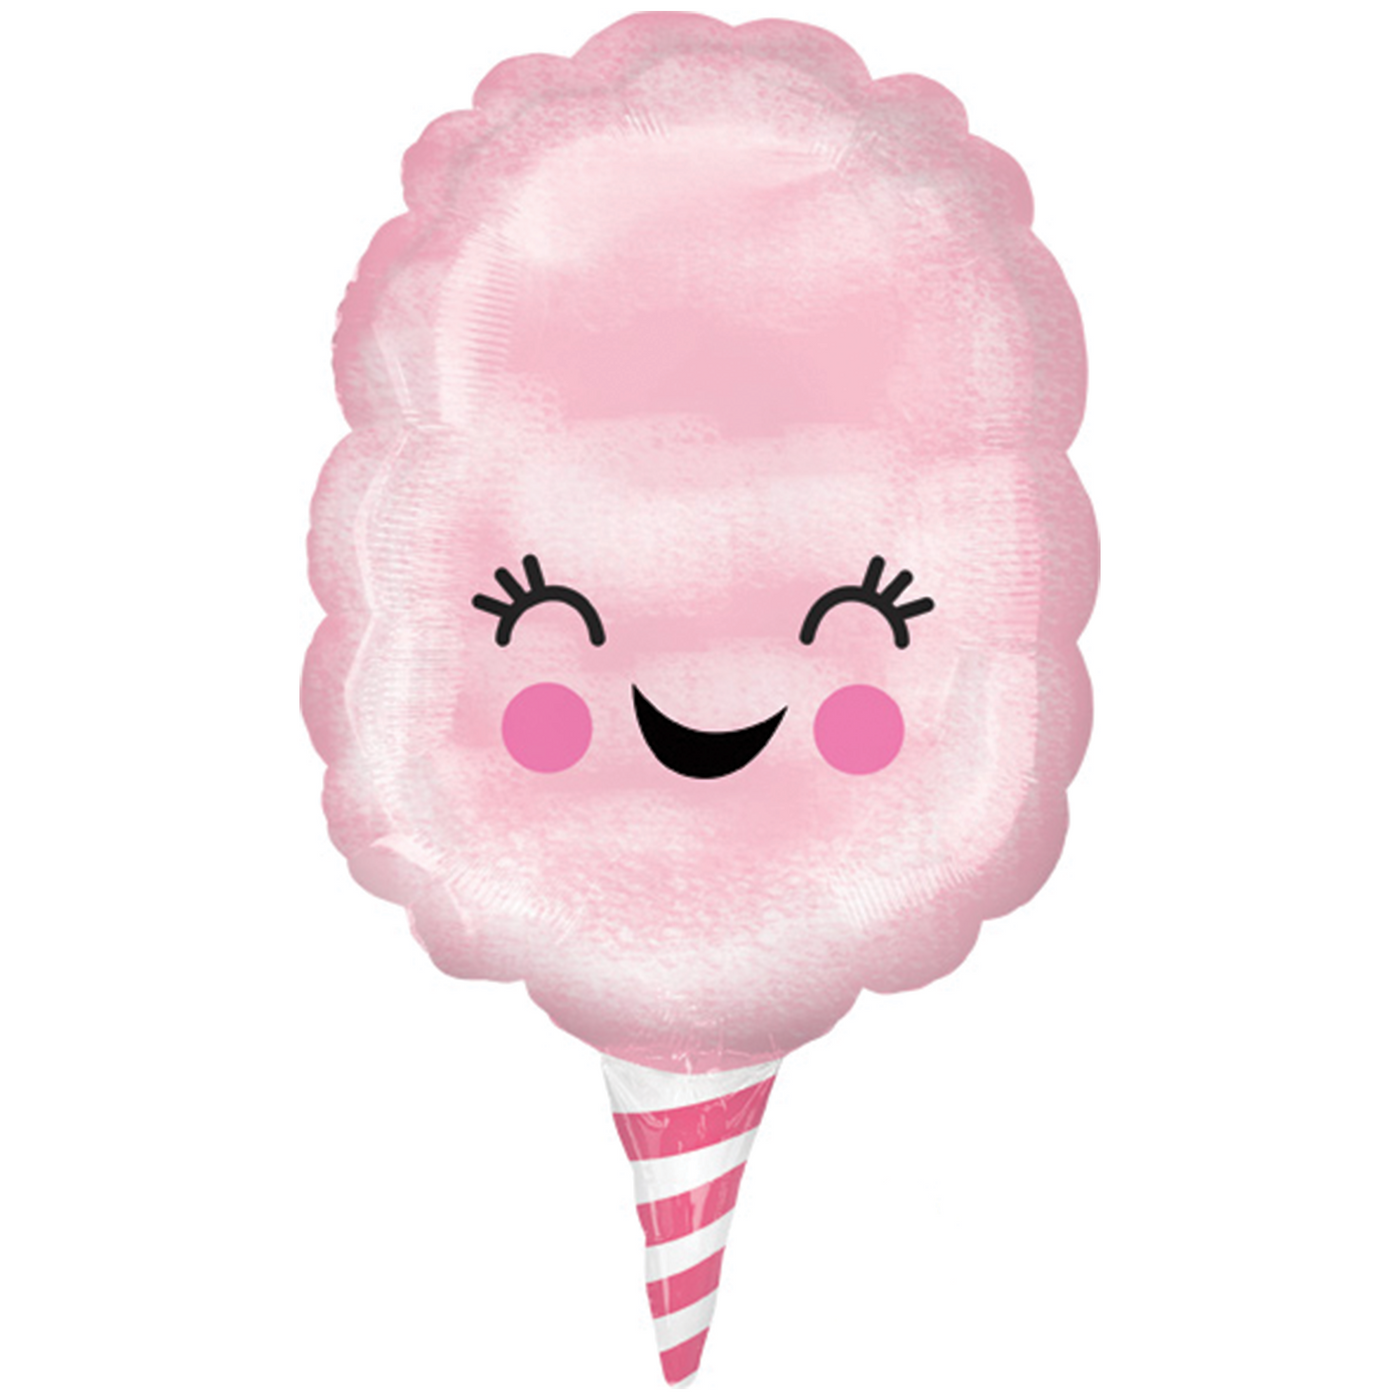 Smiley Cotton Candy